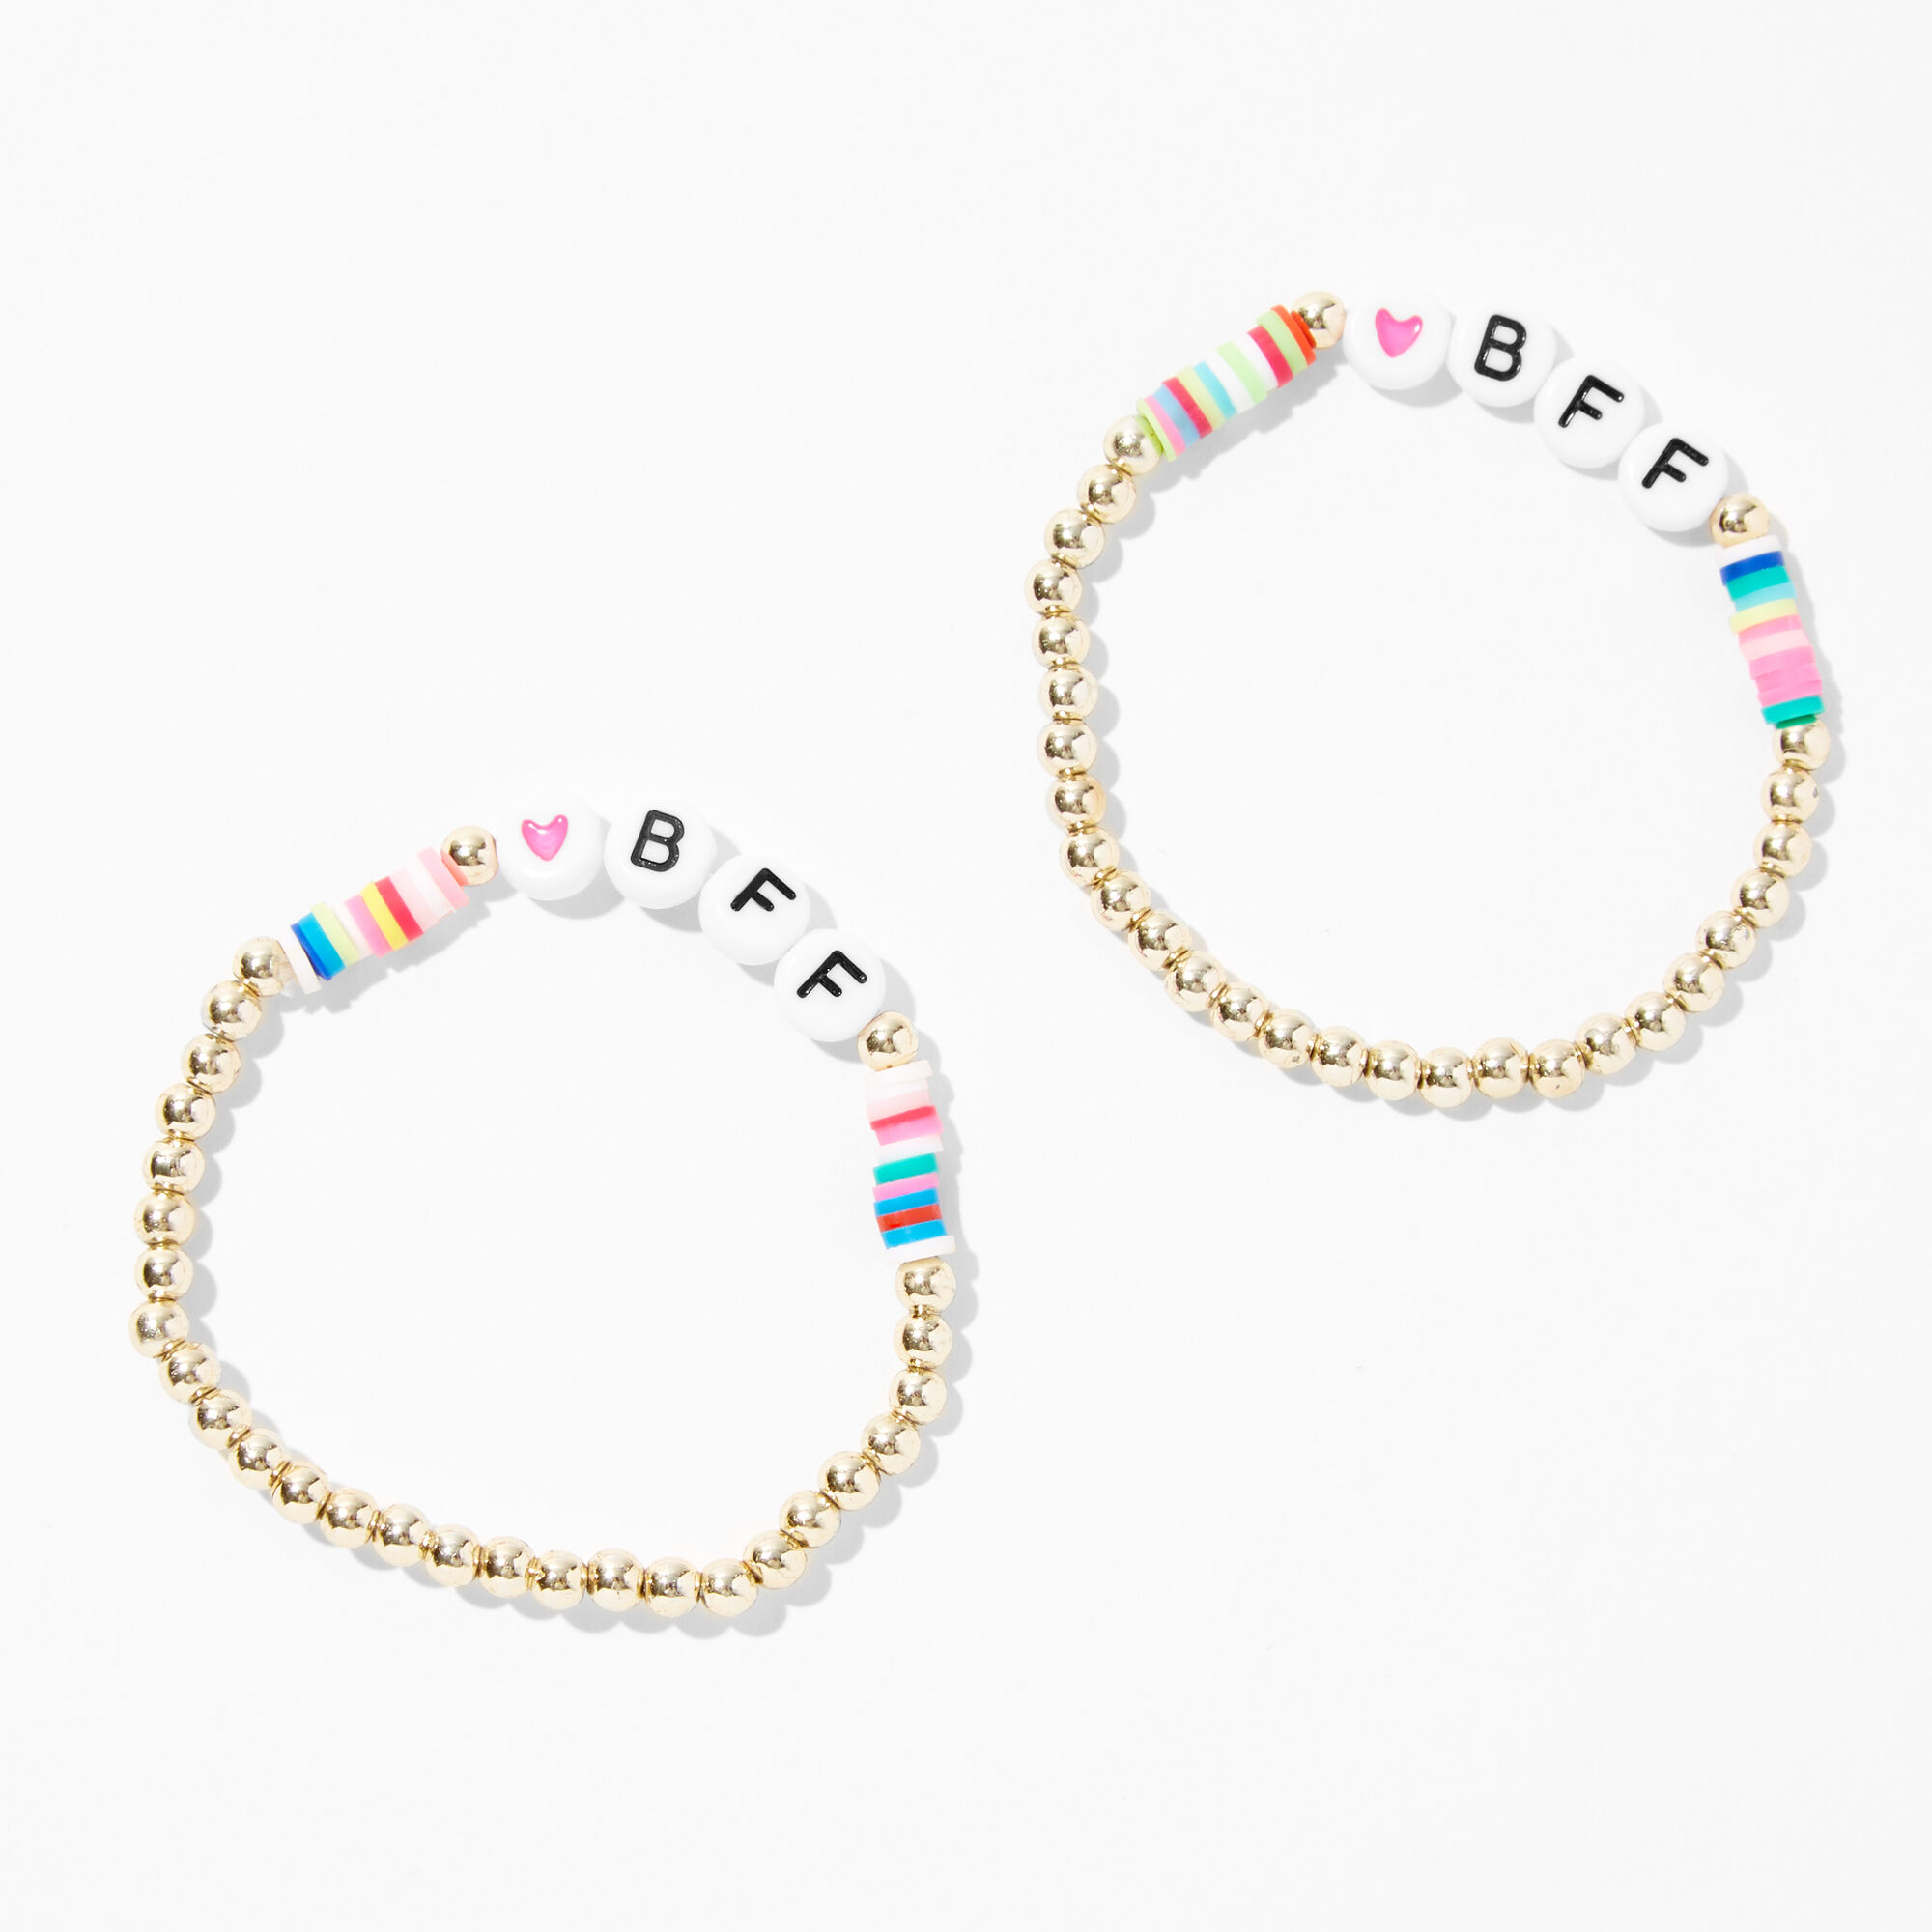 View Claires Best Friends Bff Beaded Stretch Bracelets 2 Pack Gold information